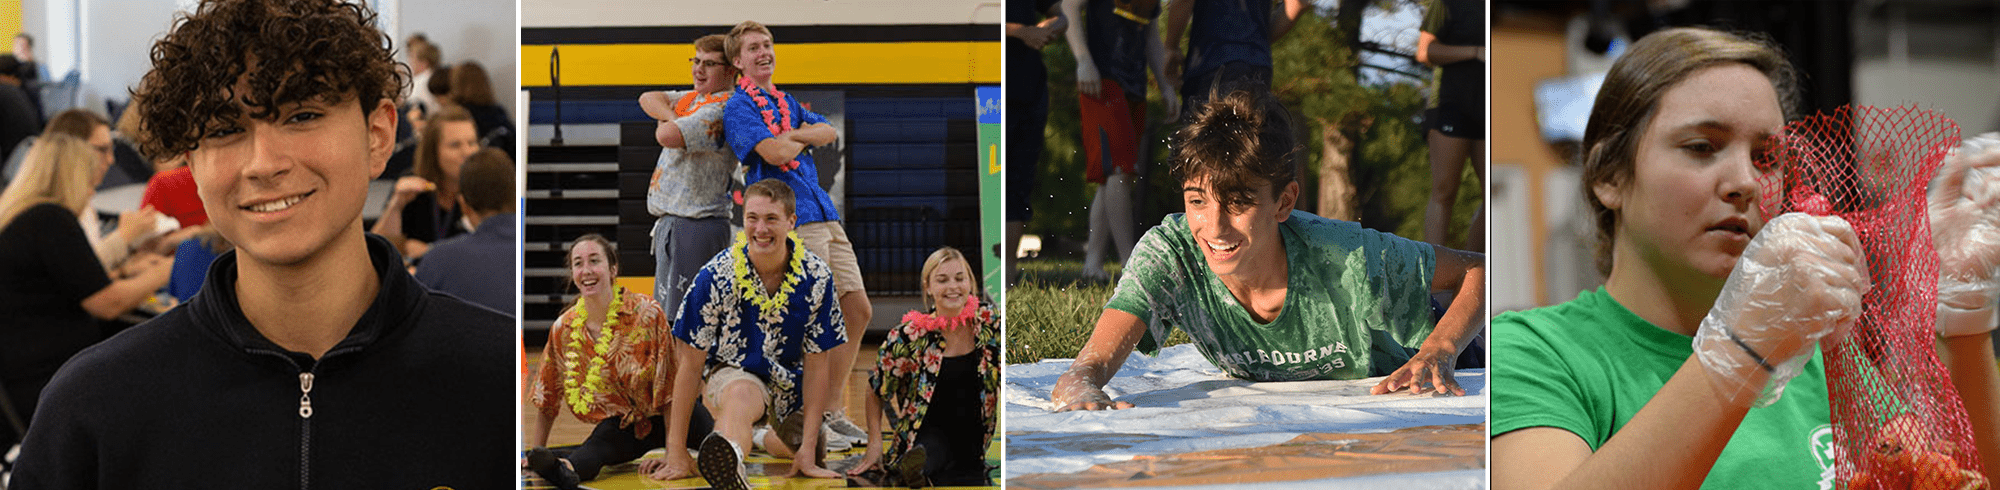 student smiling, group of students posing together in hawaiian clothes, a boy doing a slip and slide, a girl with gloves preparing food